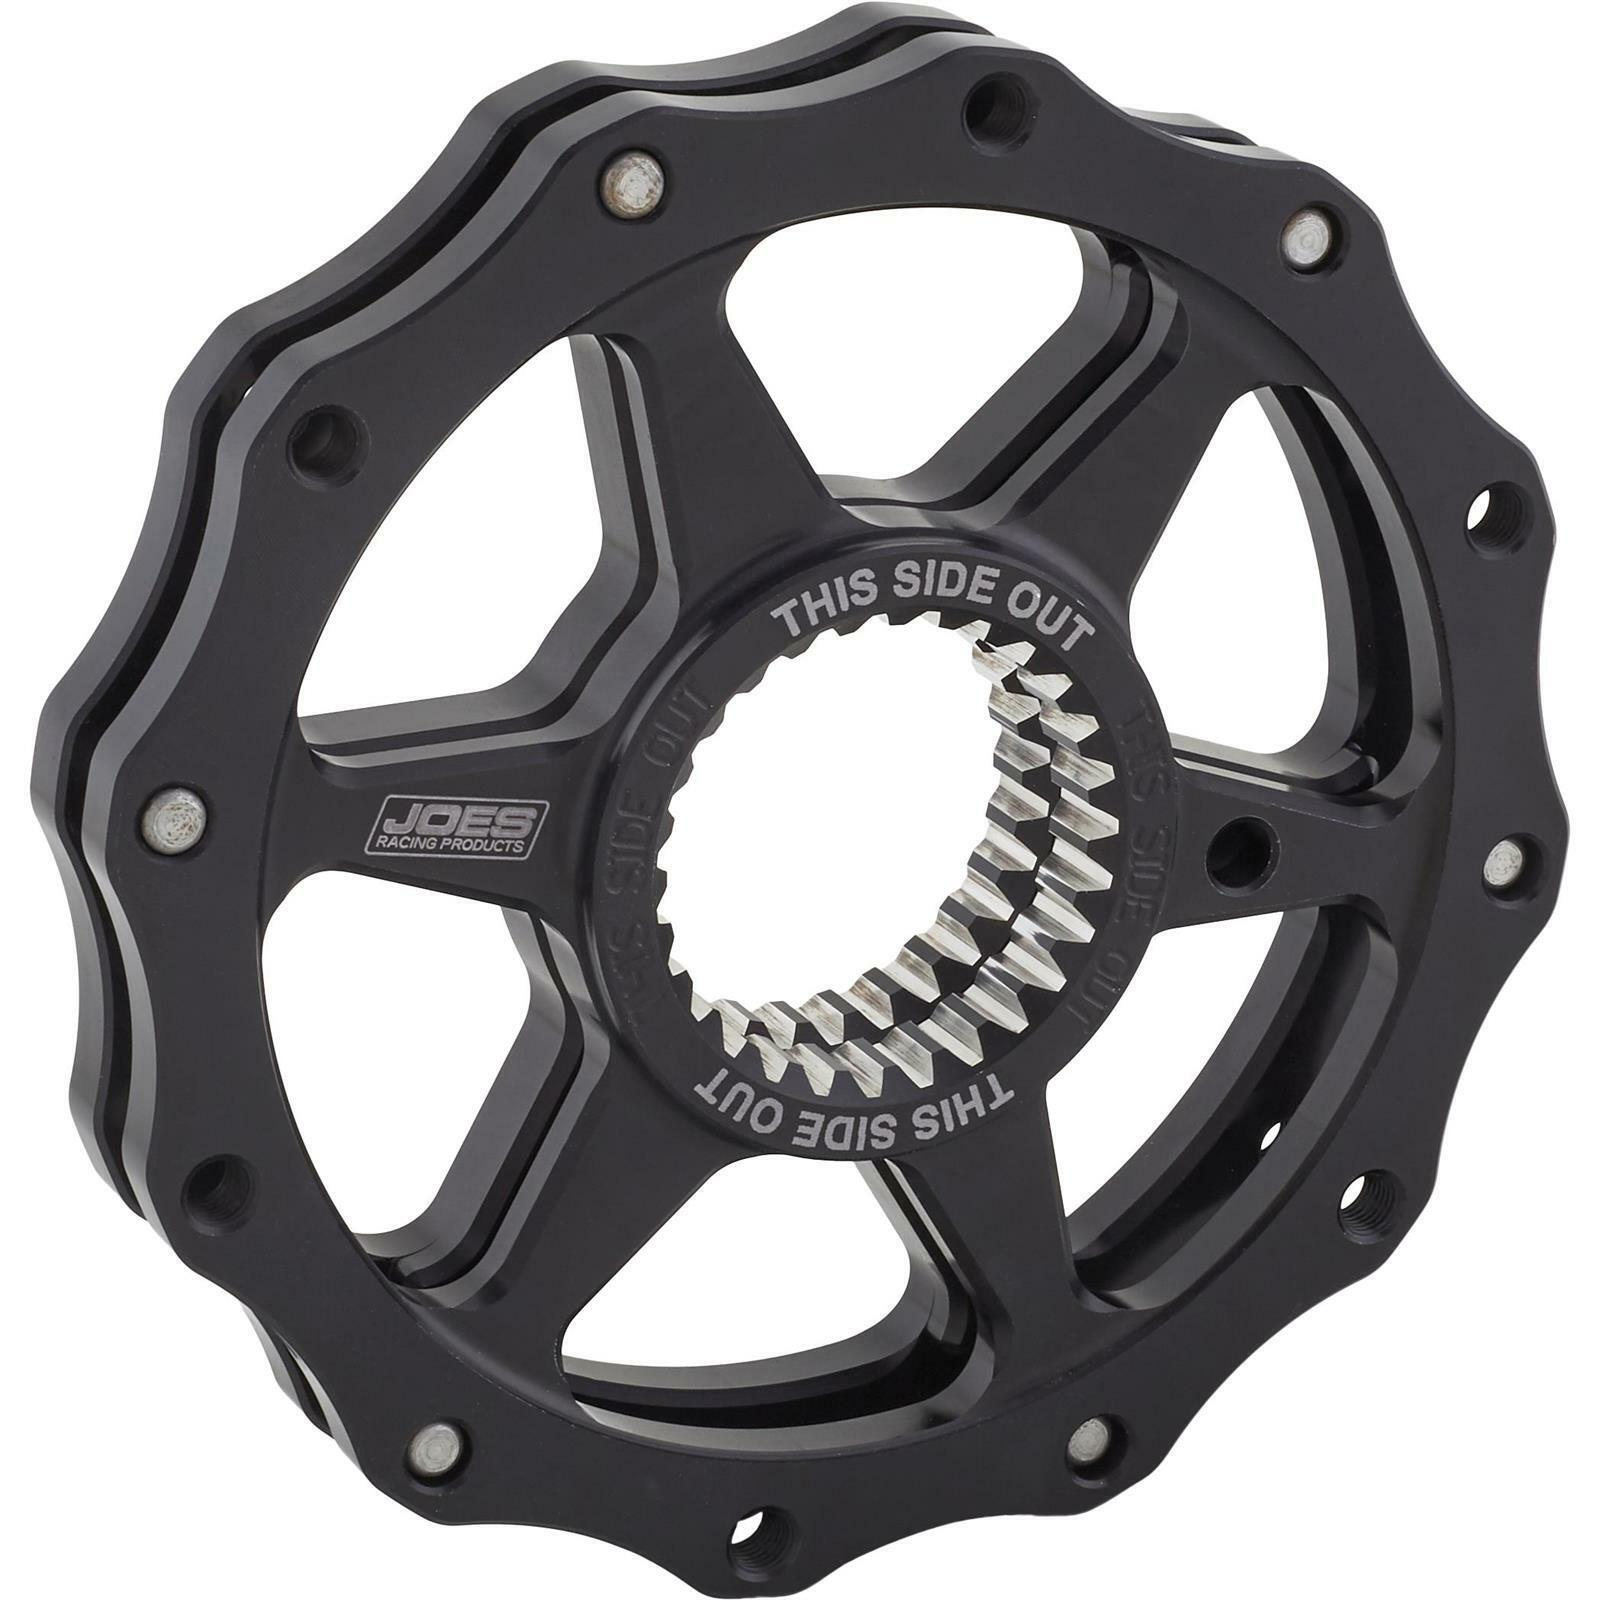 Joes 25680 Micro Sprint Quick Change Sprocket Carrier